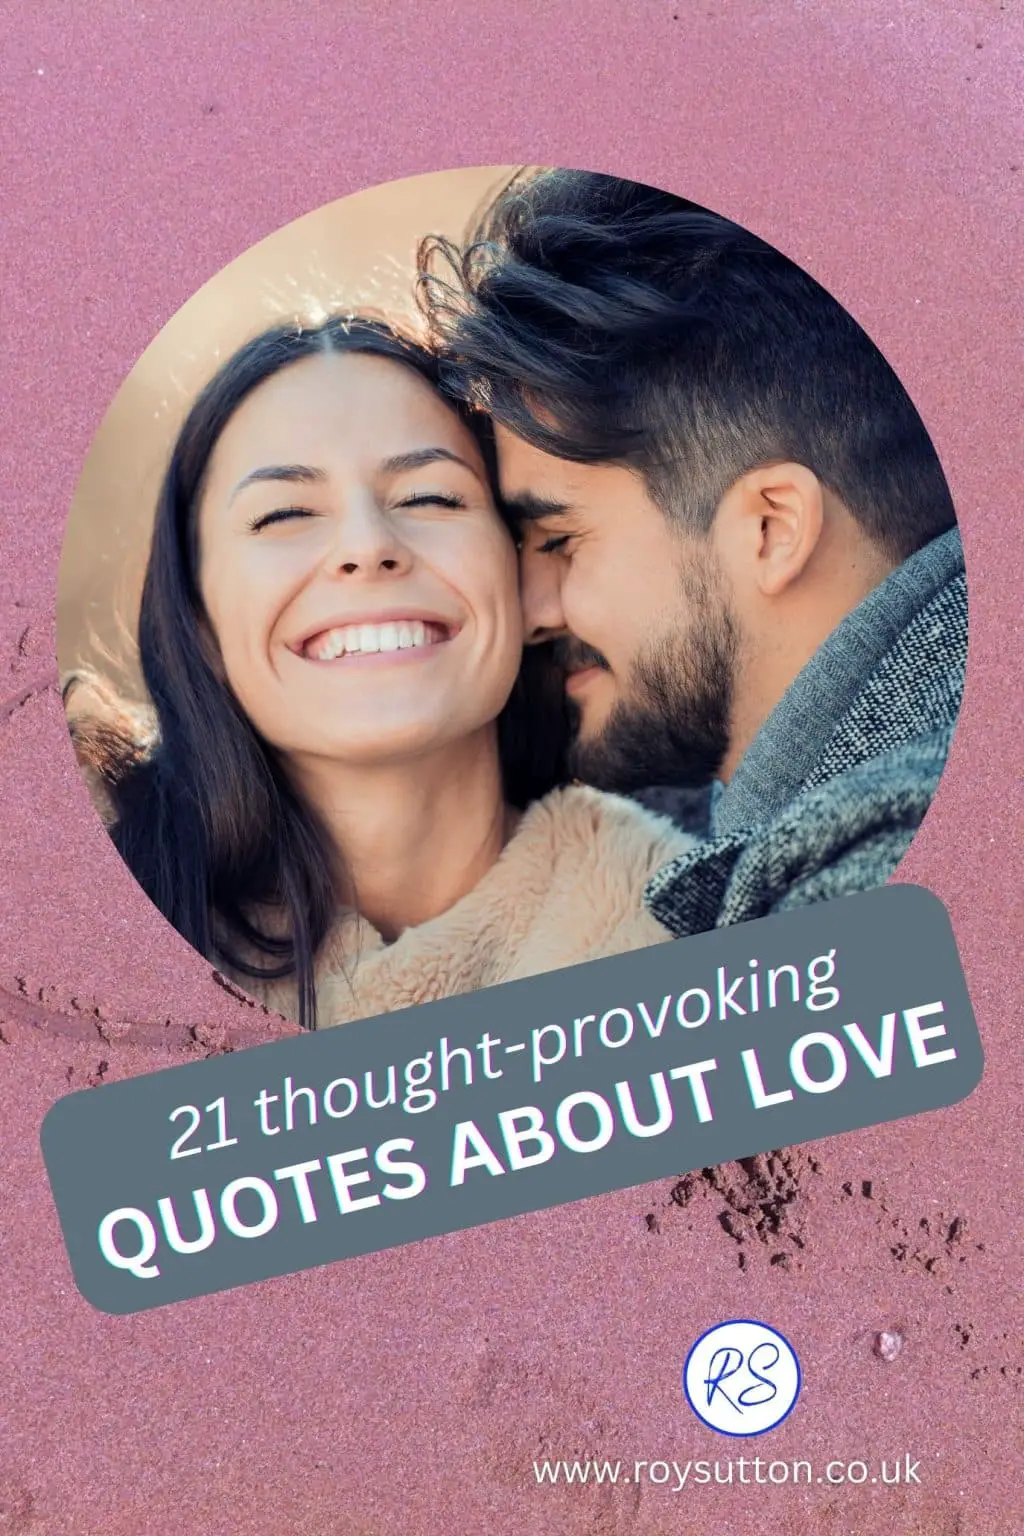 21 thought-provoking quotes about love - Roy Sutton